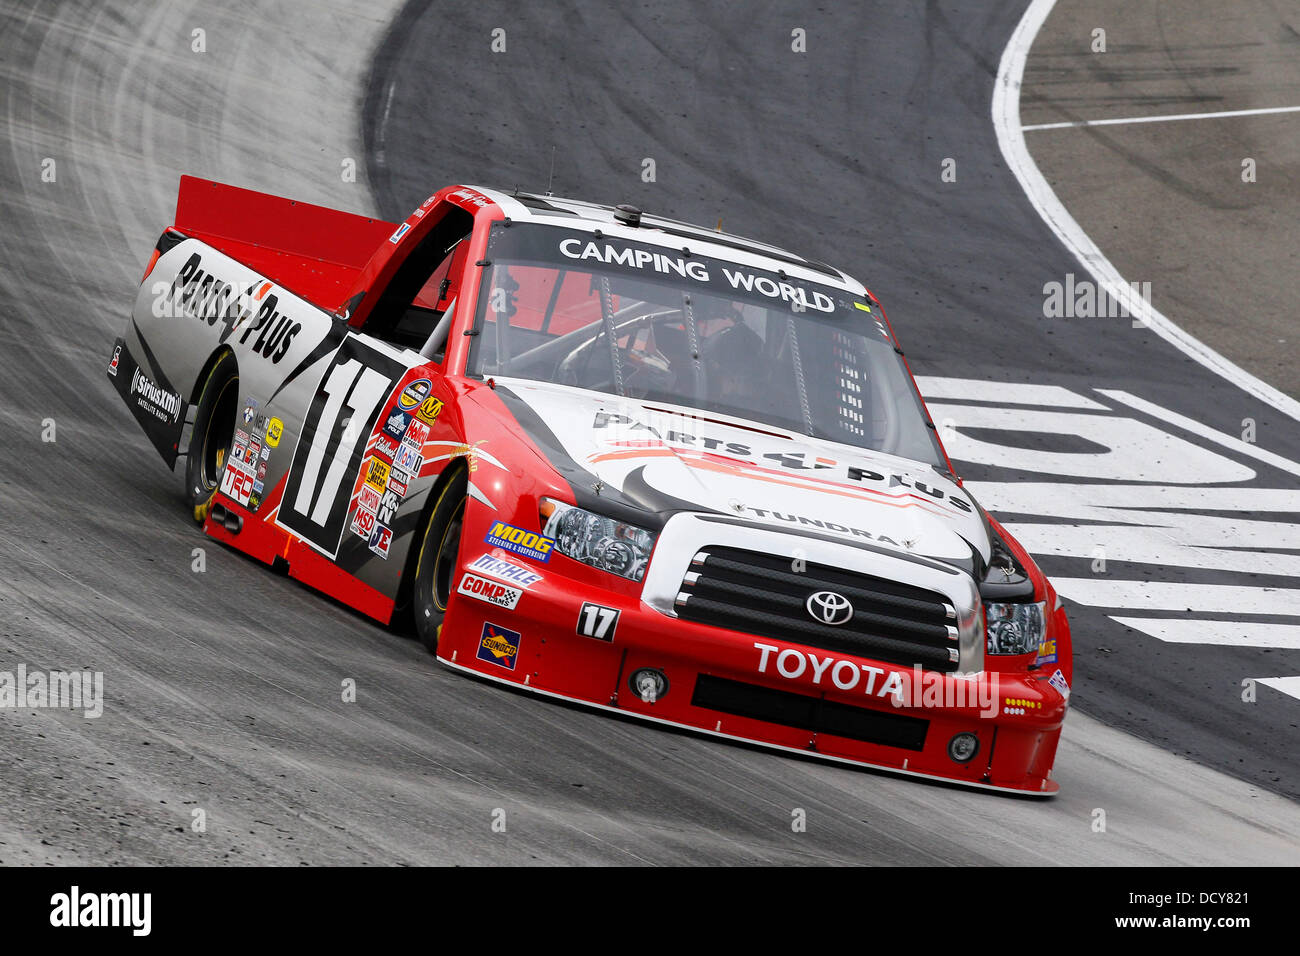 Bristol, TN, USA. 21st Aug, 2013. Bristol, TN - Aug 21, 2013: Timothy Peters (17) brings his Camping World Truck through the turns during a practice session for the UNOH 200 race at the Bristol Motor Speedway in Bristol, TN. Credit:  csm/Alamy Live News Stock Photo